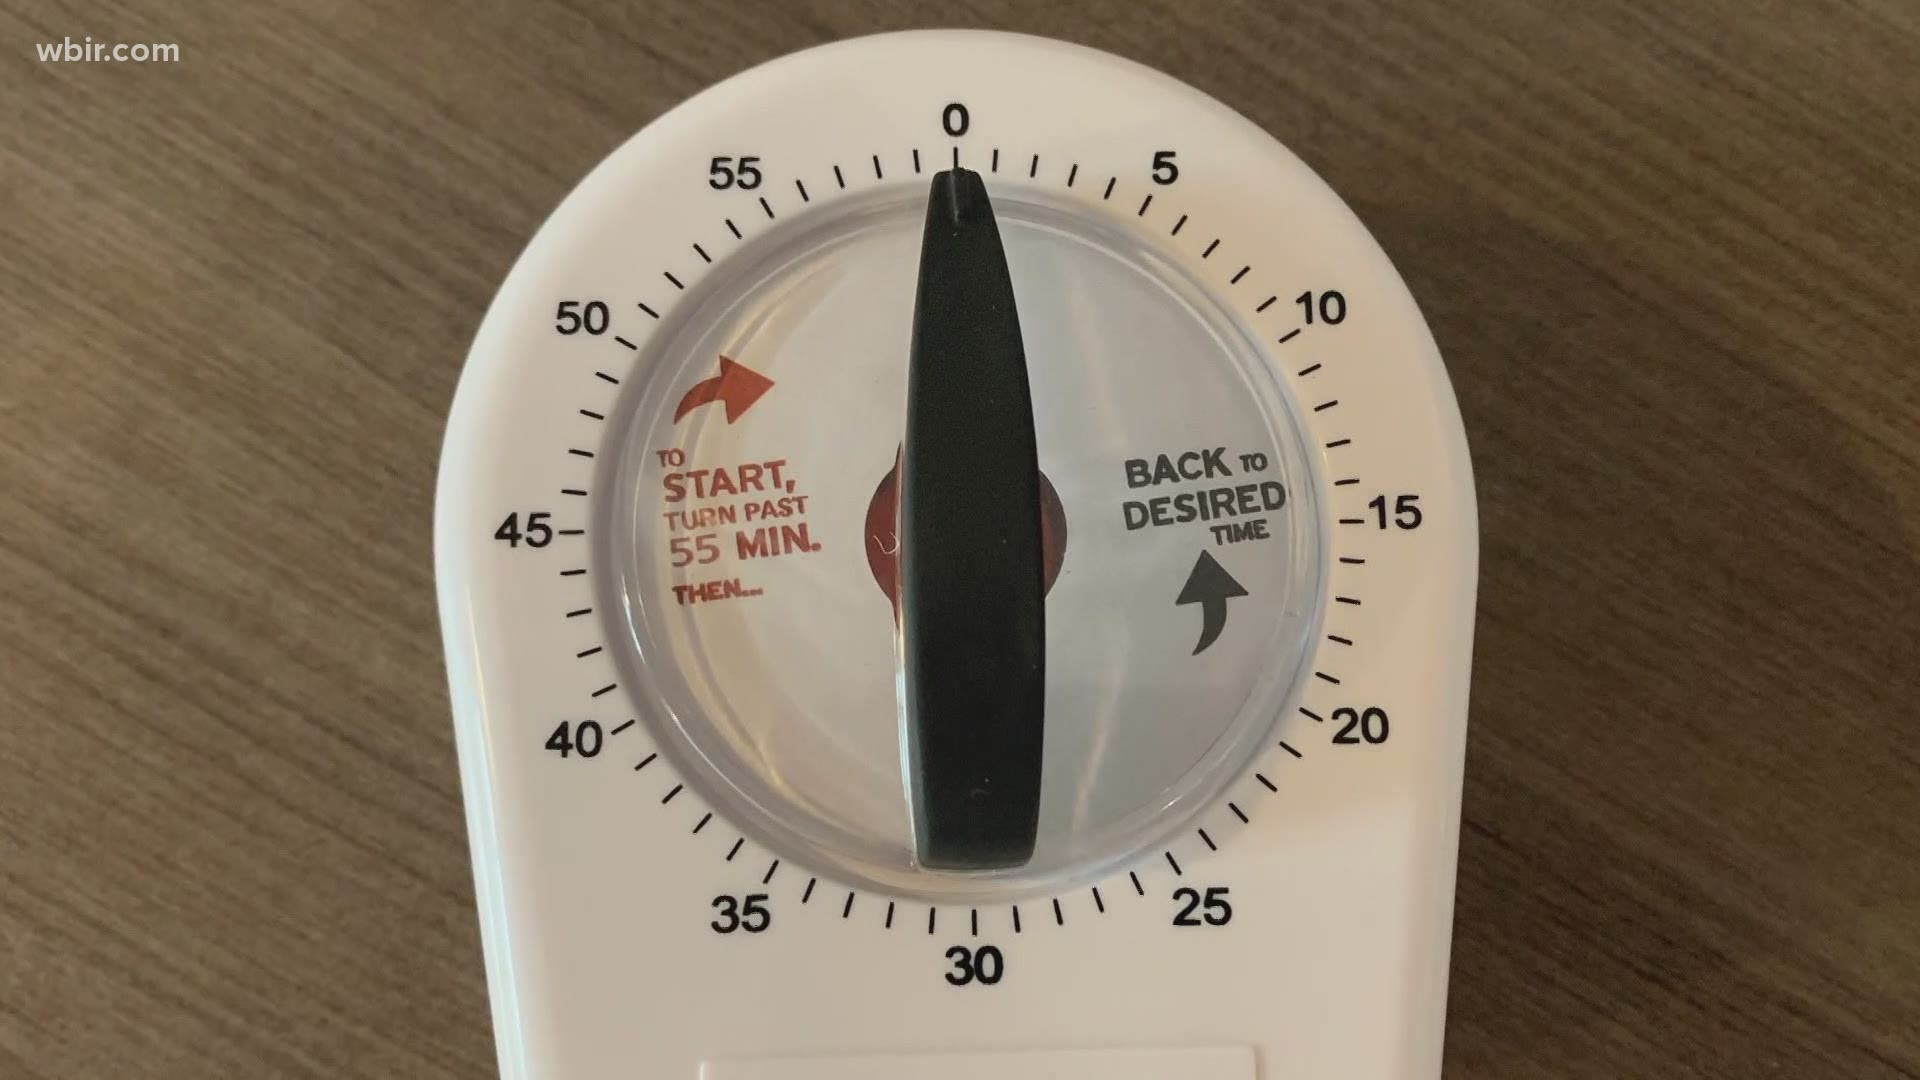 Principals in Oak Ridge told teachers to use timers so teachers during interactions with students to limit exposure time and avoid quarantine.